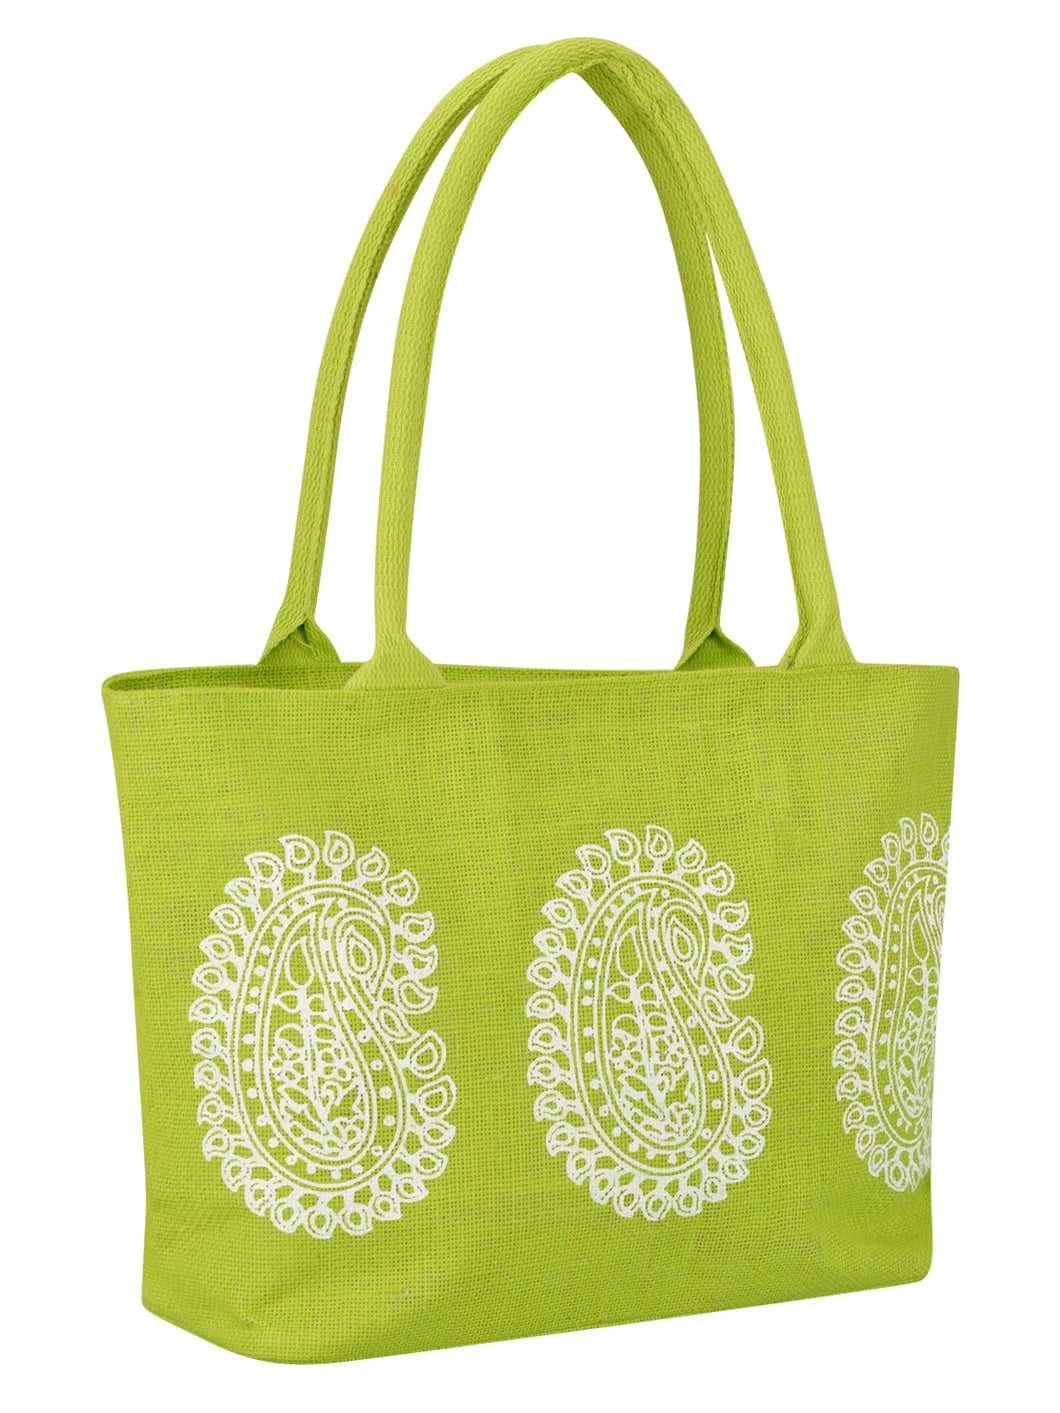 Buy Eco Friendly Reusable Jute Tote Bag Carry with Zip, Reinforced Handle  for Men Women, perfect for carry vegetables and other groceries (All Size)  at Amazon.in